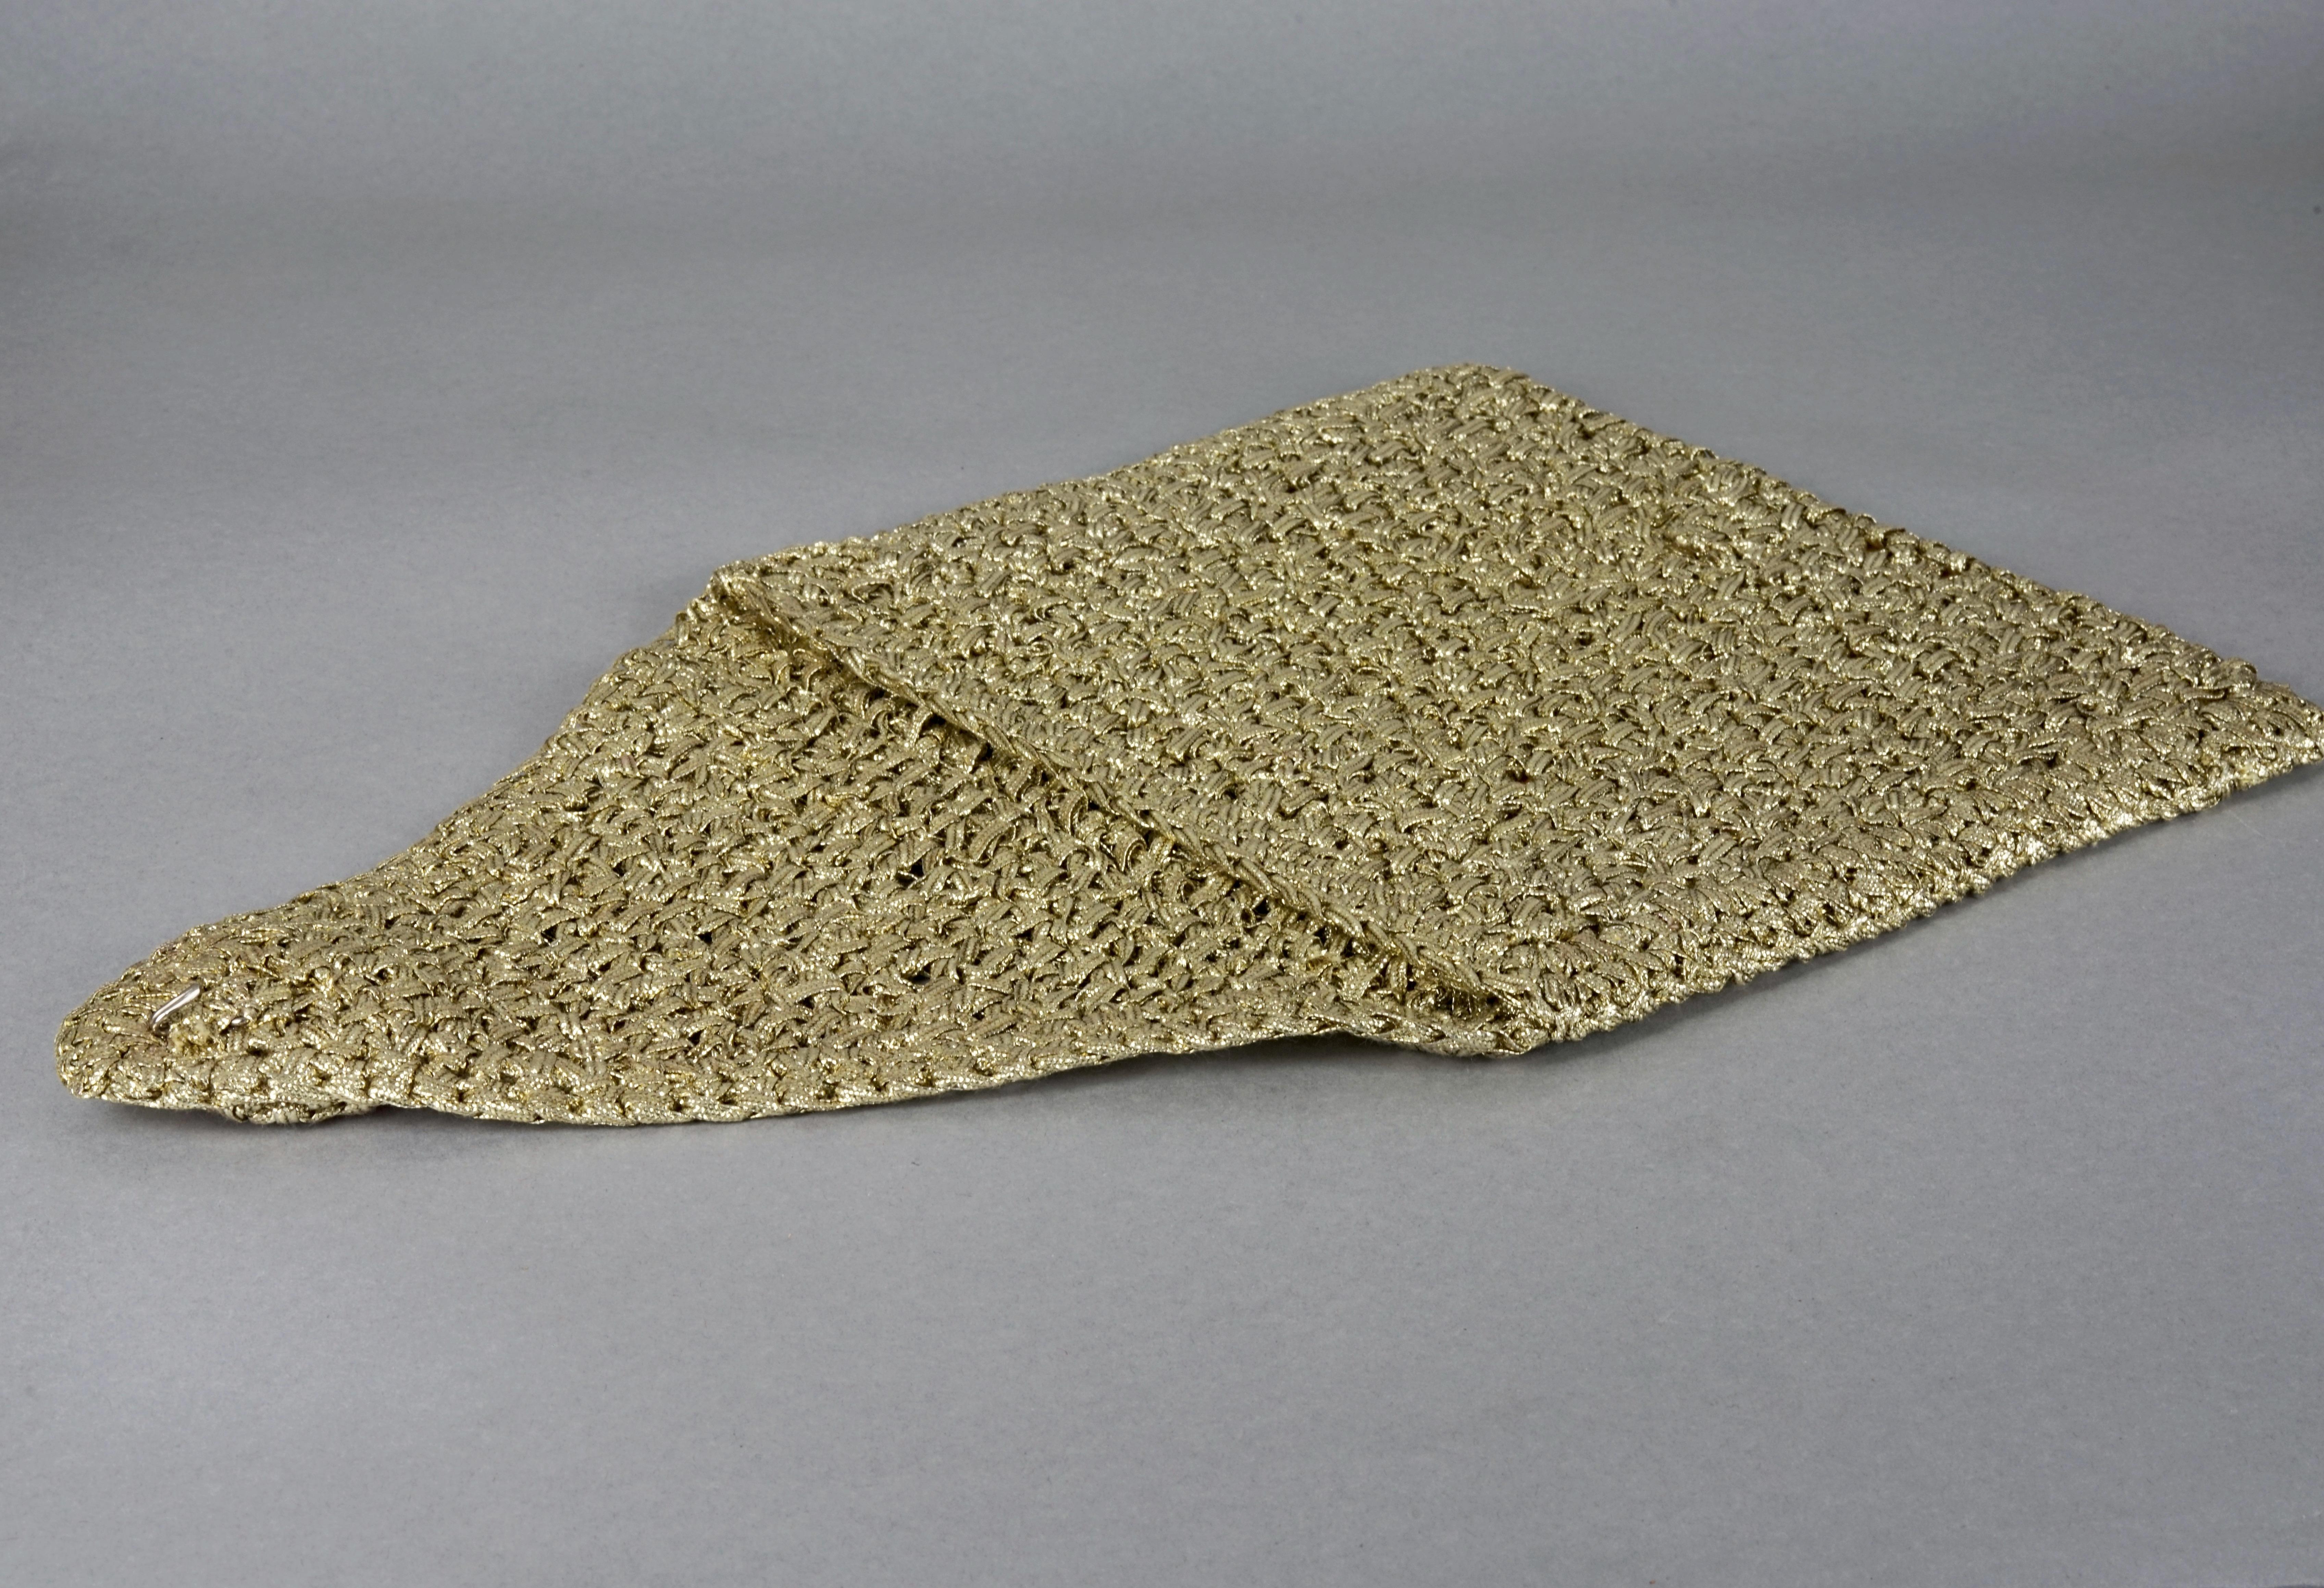 Women's Vintage 1960s KORET ITALY Gold Woven Large Clutch Bag For Sale